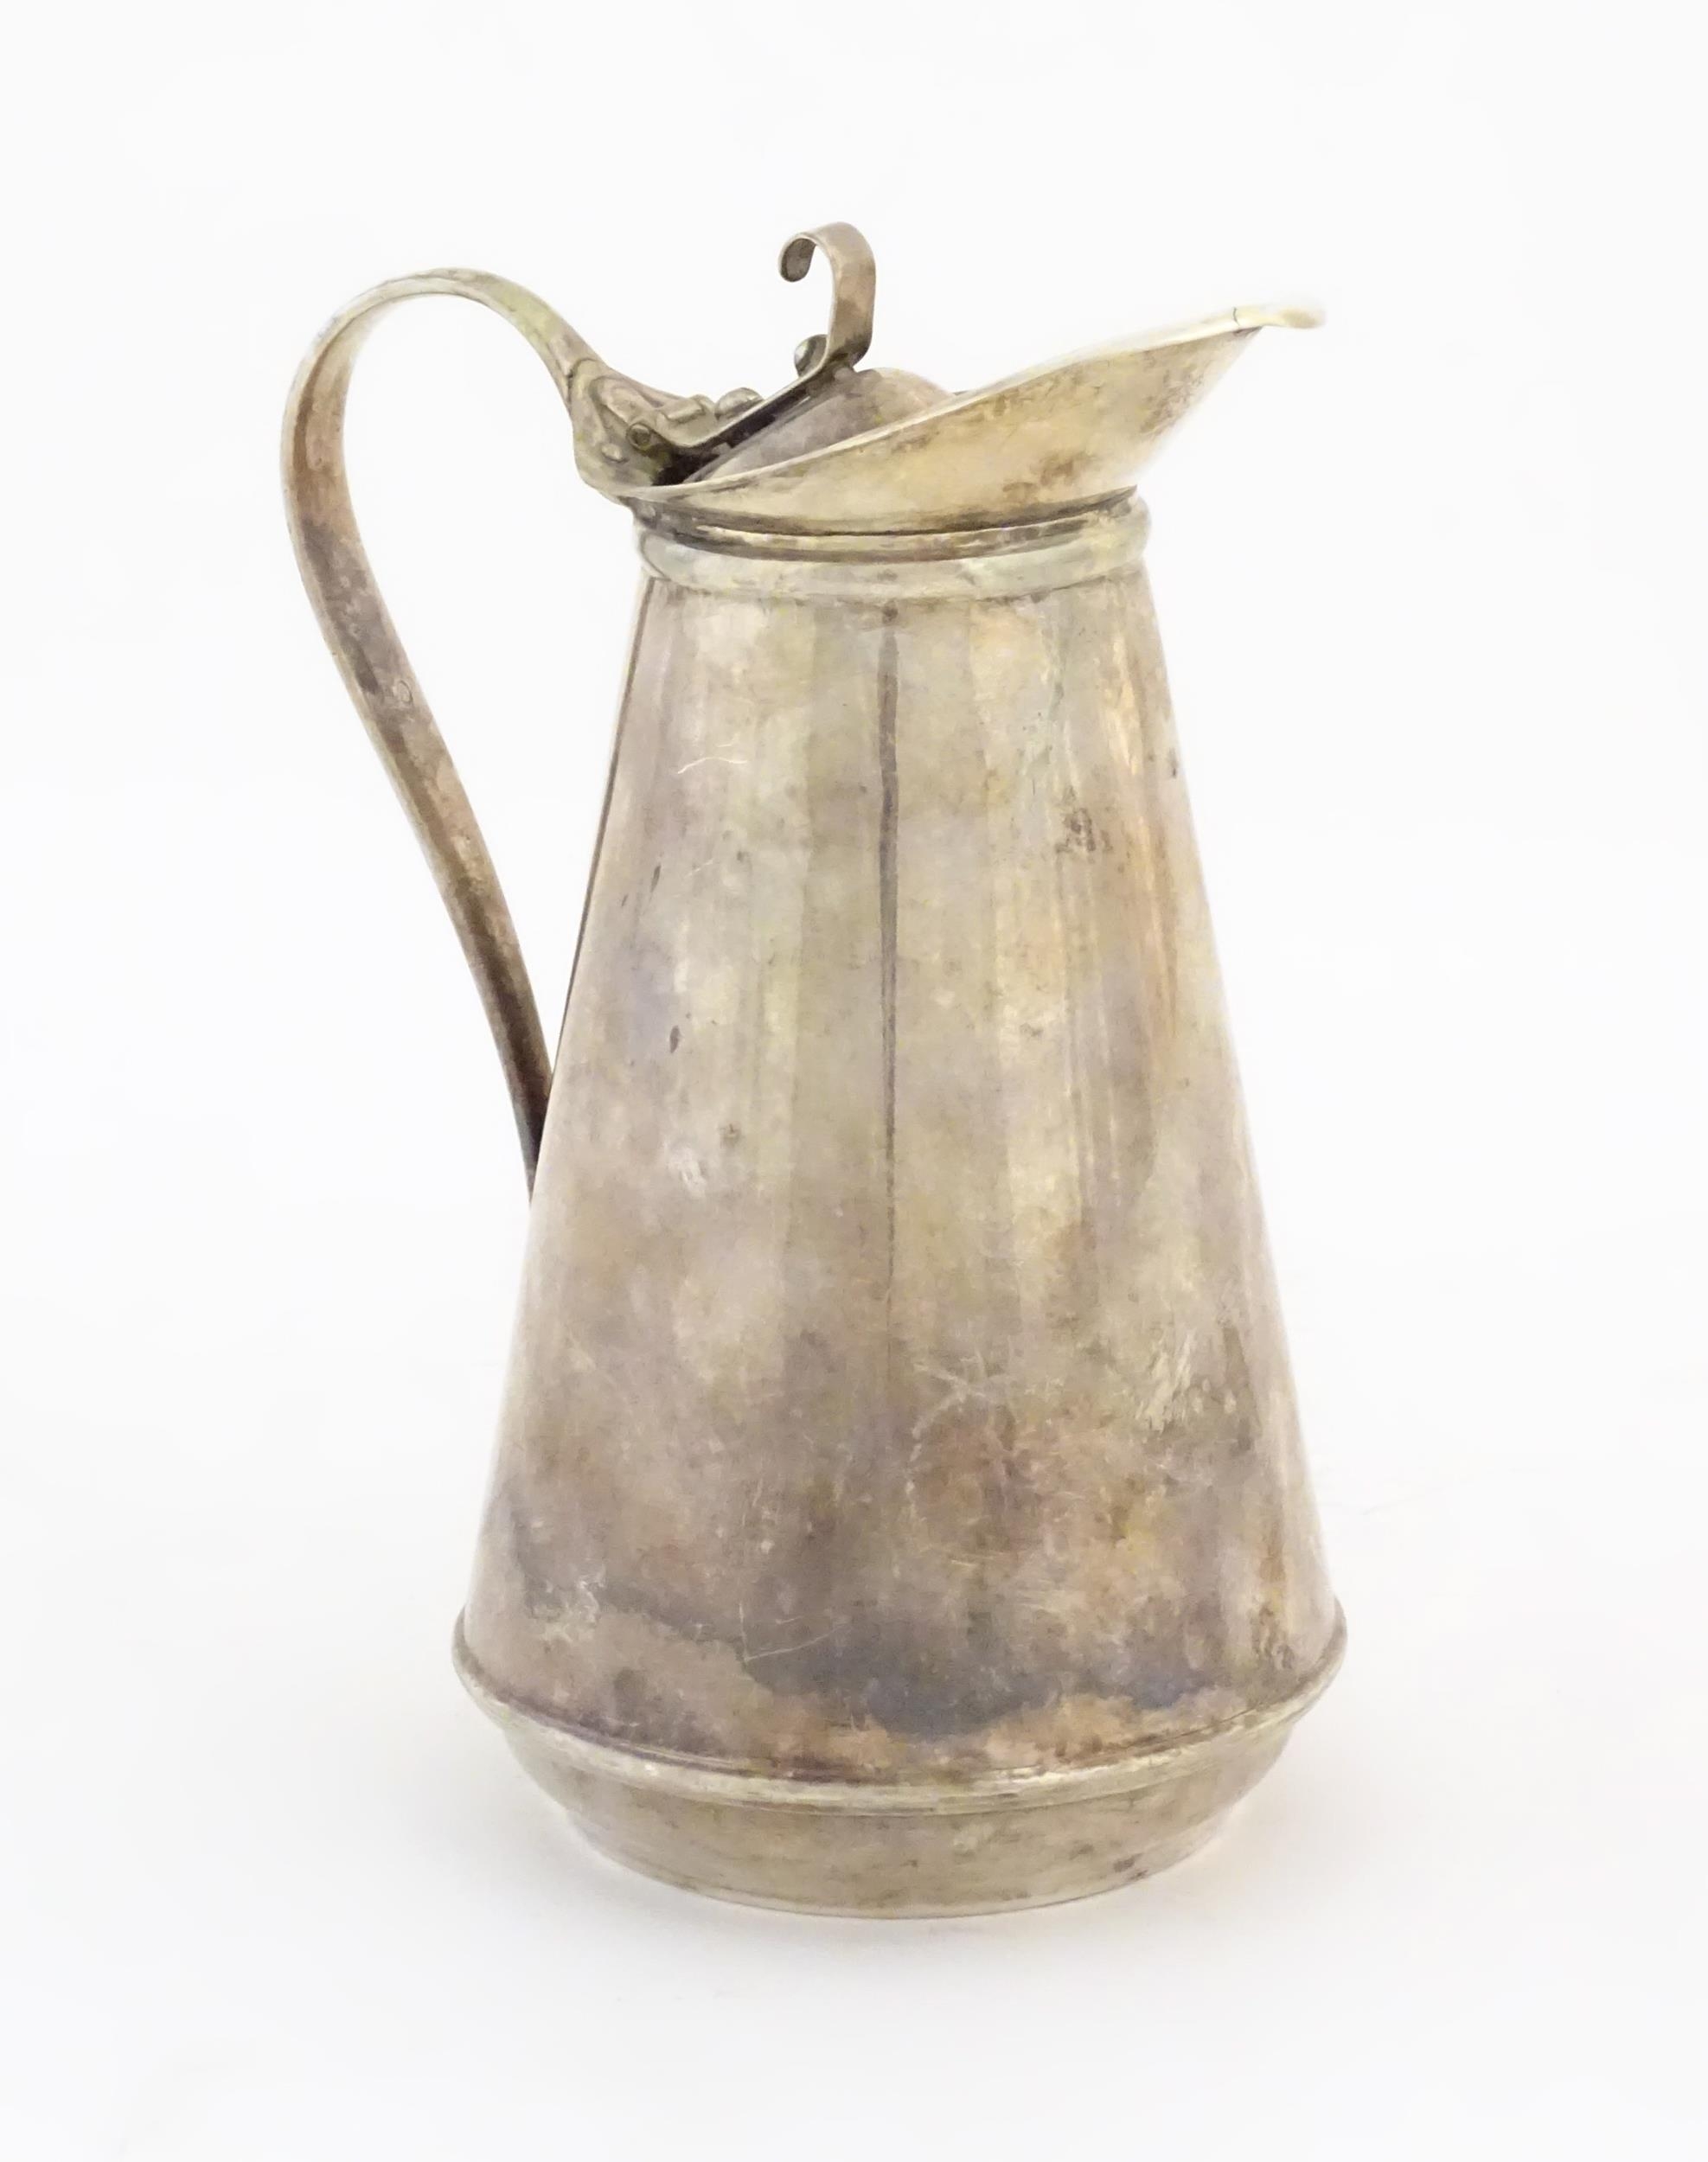 WAS Benson: An Arts & Crafts white metal coffee pot / hot water pot with liner, stamped W.A.S.